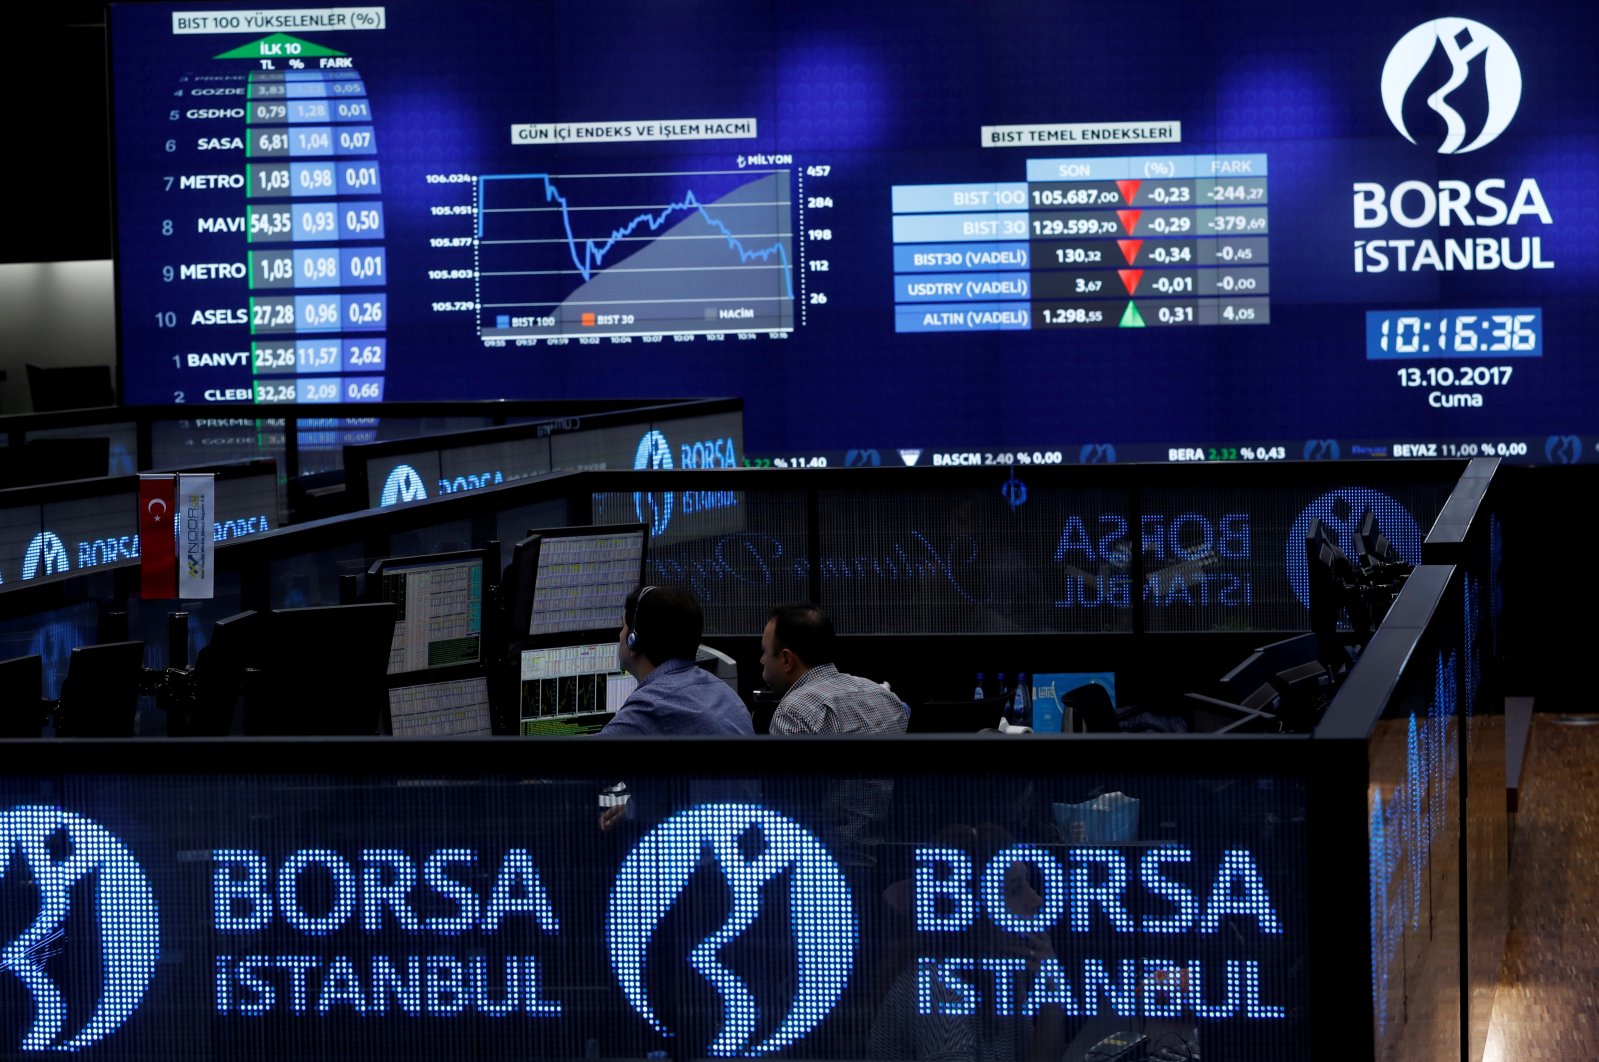 Traders work at their desks on the floor of the Borsa Istanbul in Istanbul, Turkey, Oct. 13, 2017. (Reuters Photo)